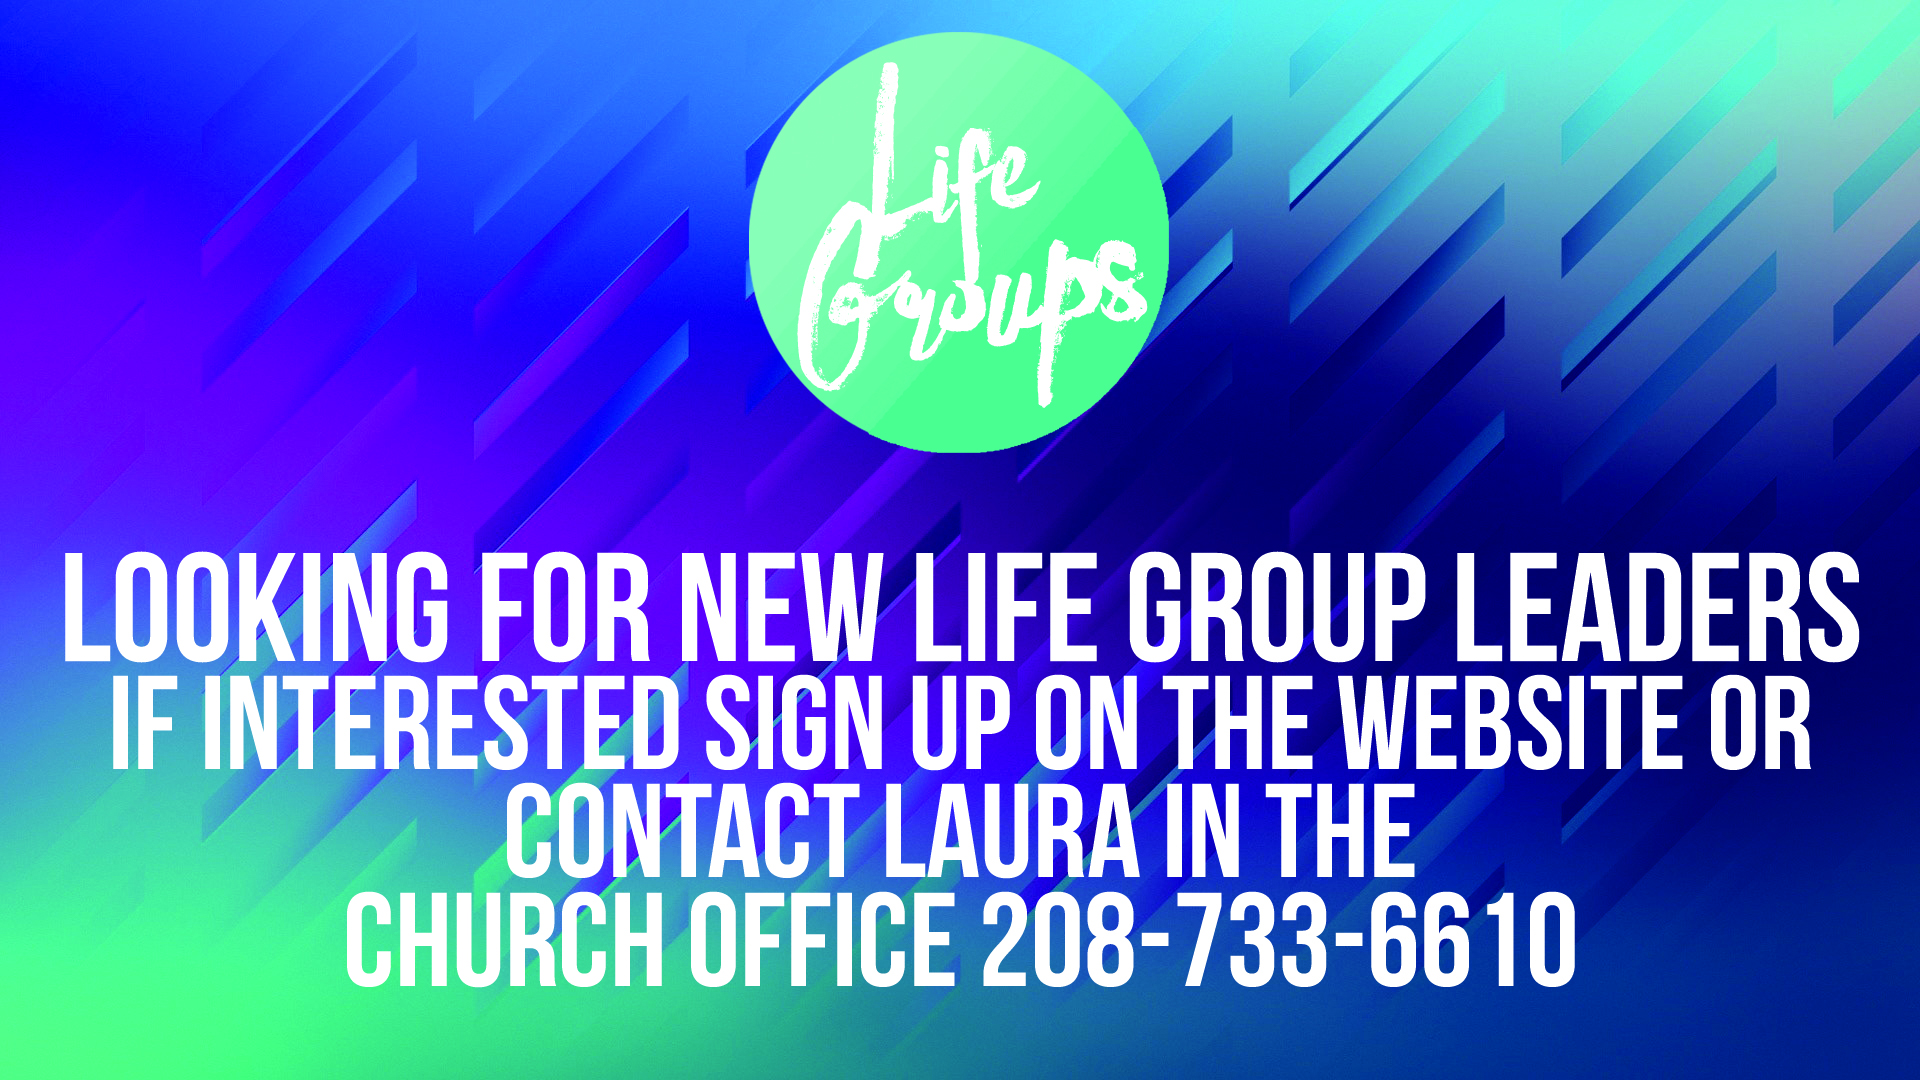 Looking for New Life Group Leaders, call 208-733-6610